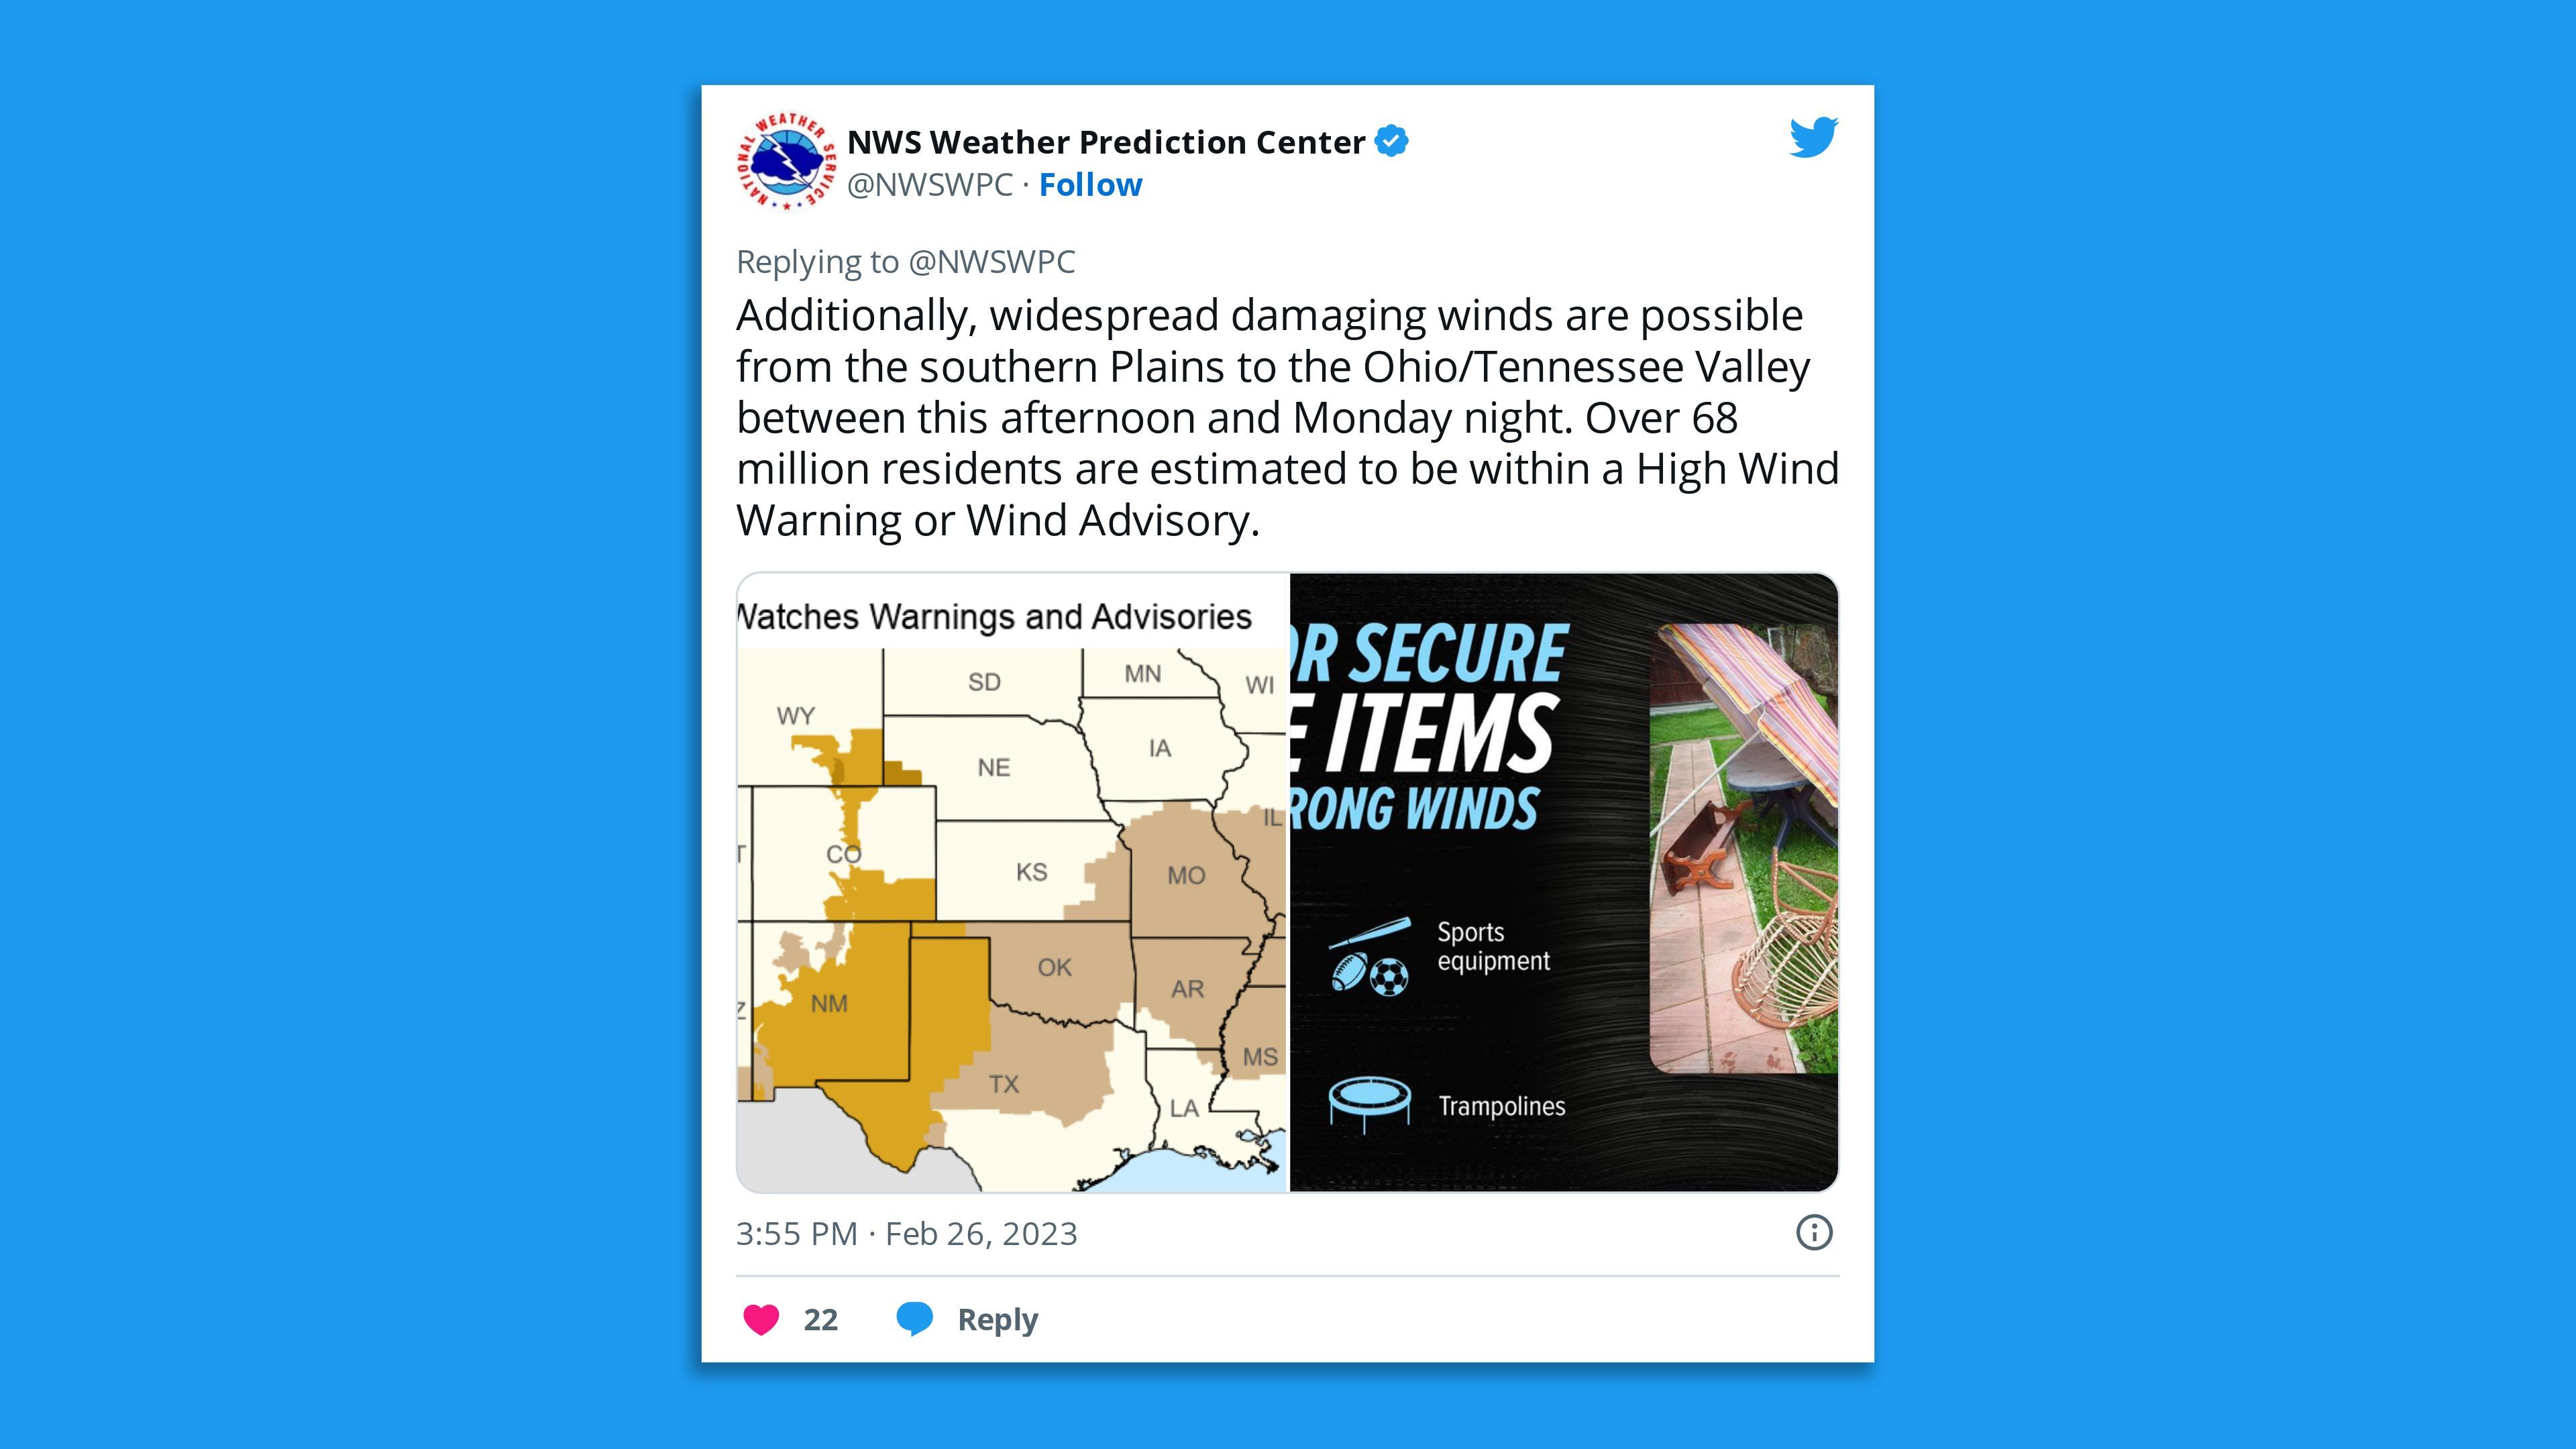 A screenshot of an NWS tweet stating "Additionally, widespread damaging winds are possible from the southern Plains to the Ohio/Tennessee Valley between this afternoon and Monday night. Over 68 million residents are estimated to be within a High Wind Warning or Wind Advisory."